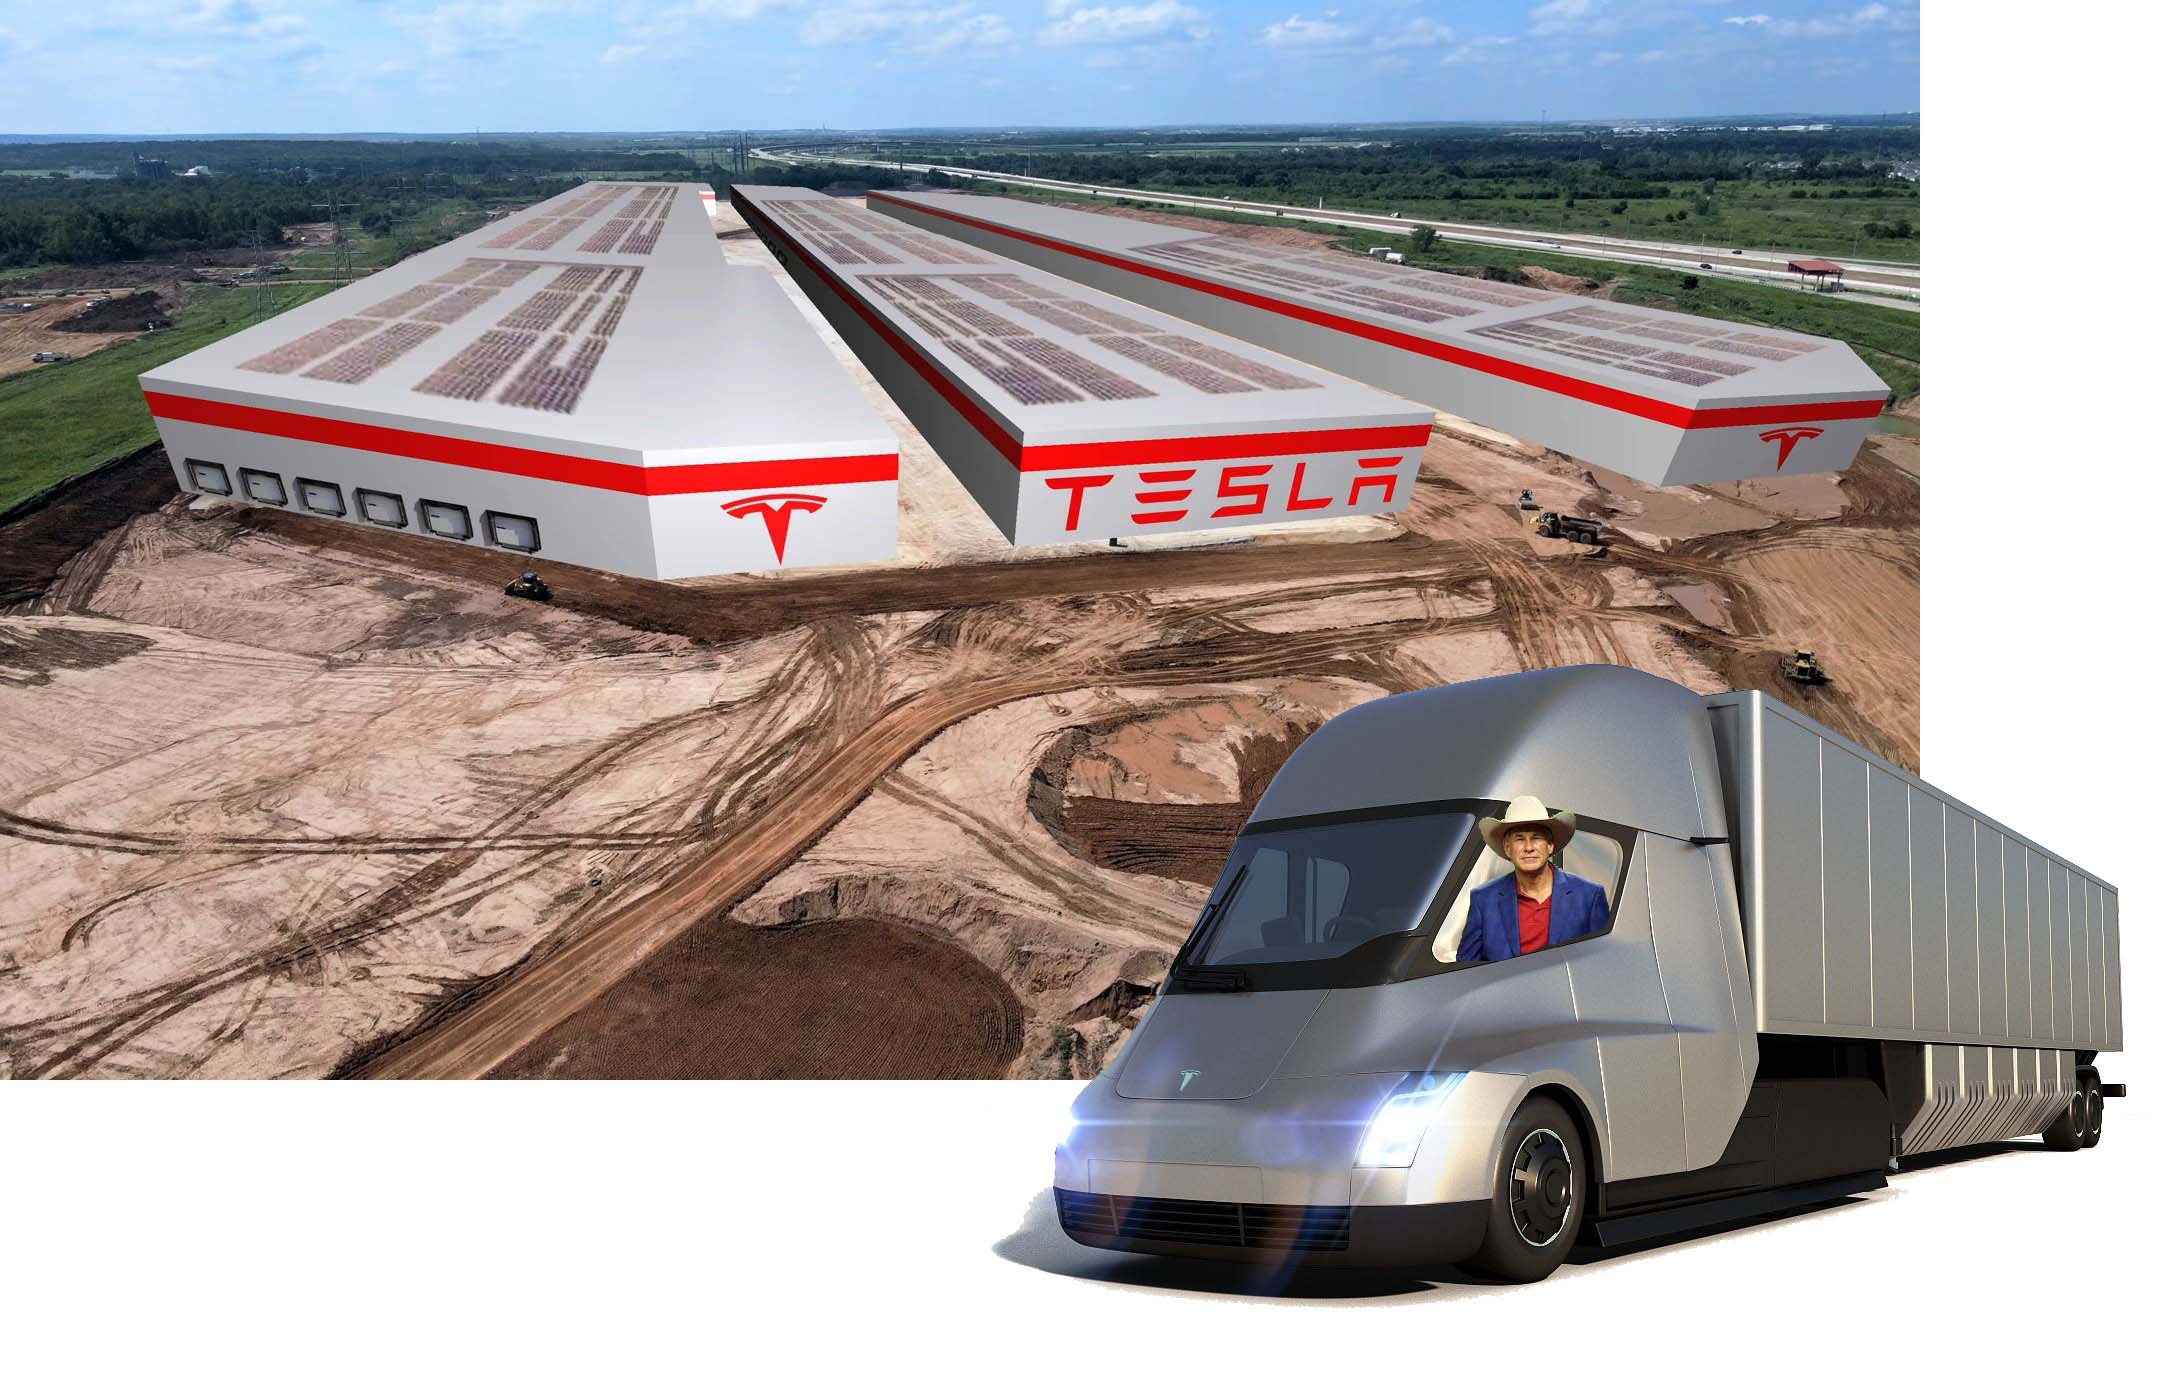 The largest job-generating project announced in 2020 was Tesla’s Gigafactory. Del Valle, Texas, outside Austin, will be the location of the 5,000-job manufacturing site for the Tesla Semi, among other models by the automaker.